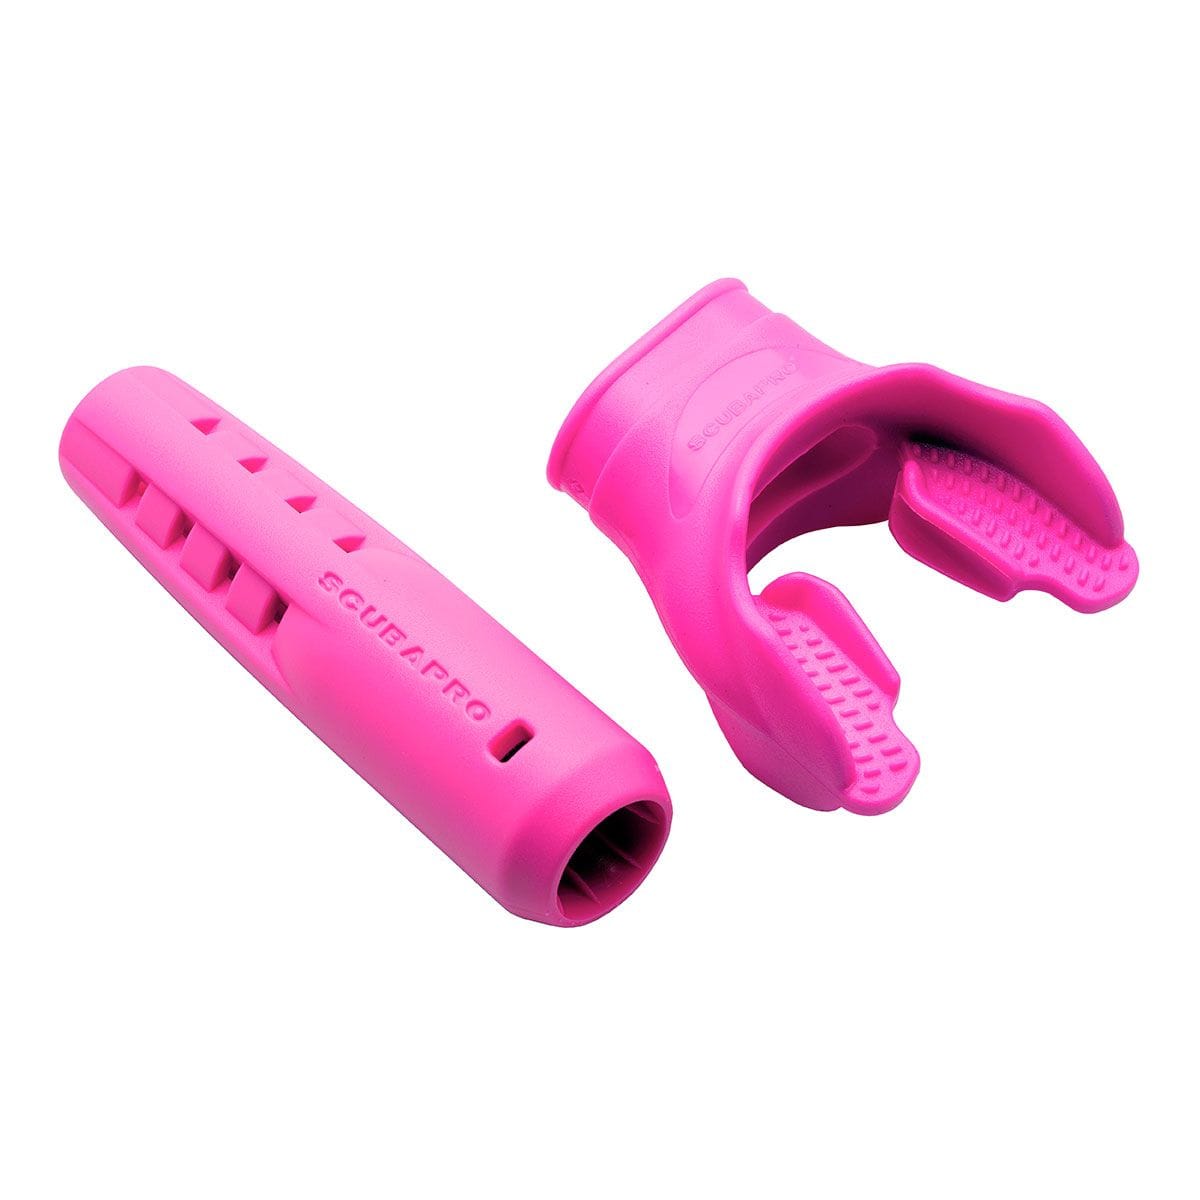 ScubaPro Related Hot Pink Scubapro Mouthpiece + Hose Protector Sleeve Kit